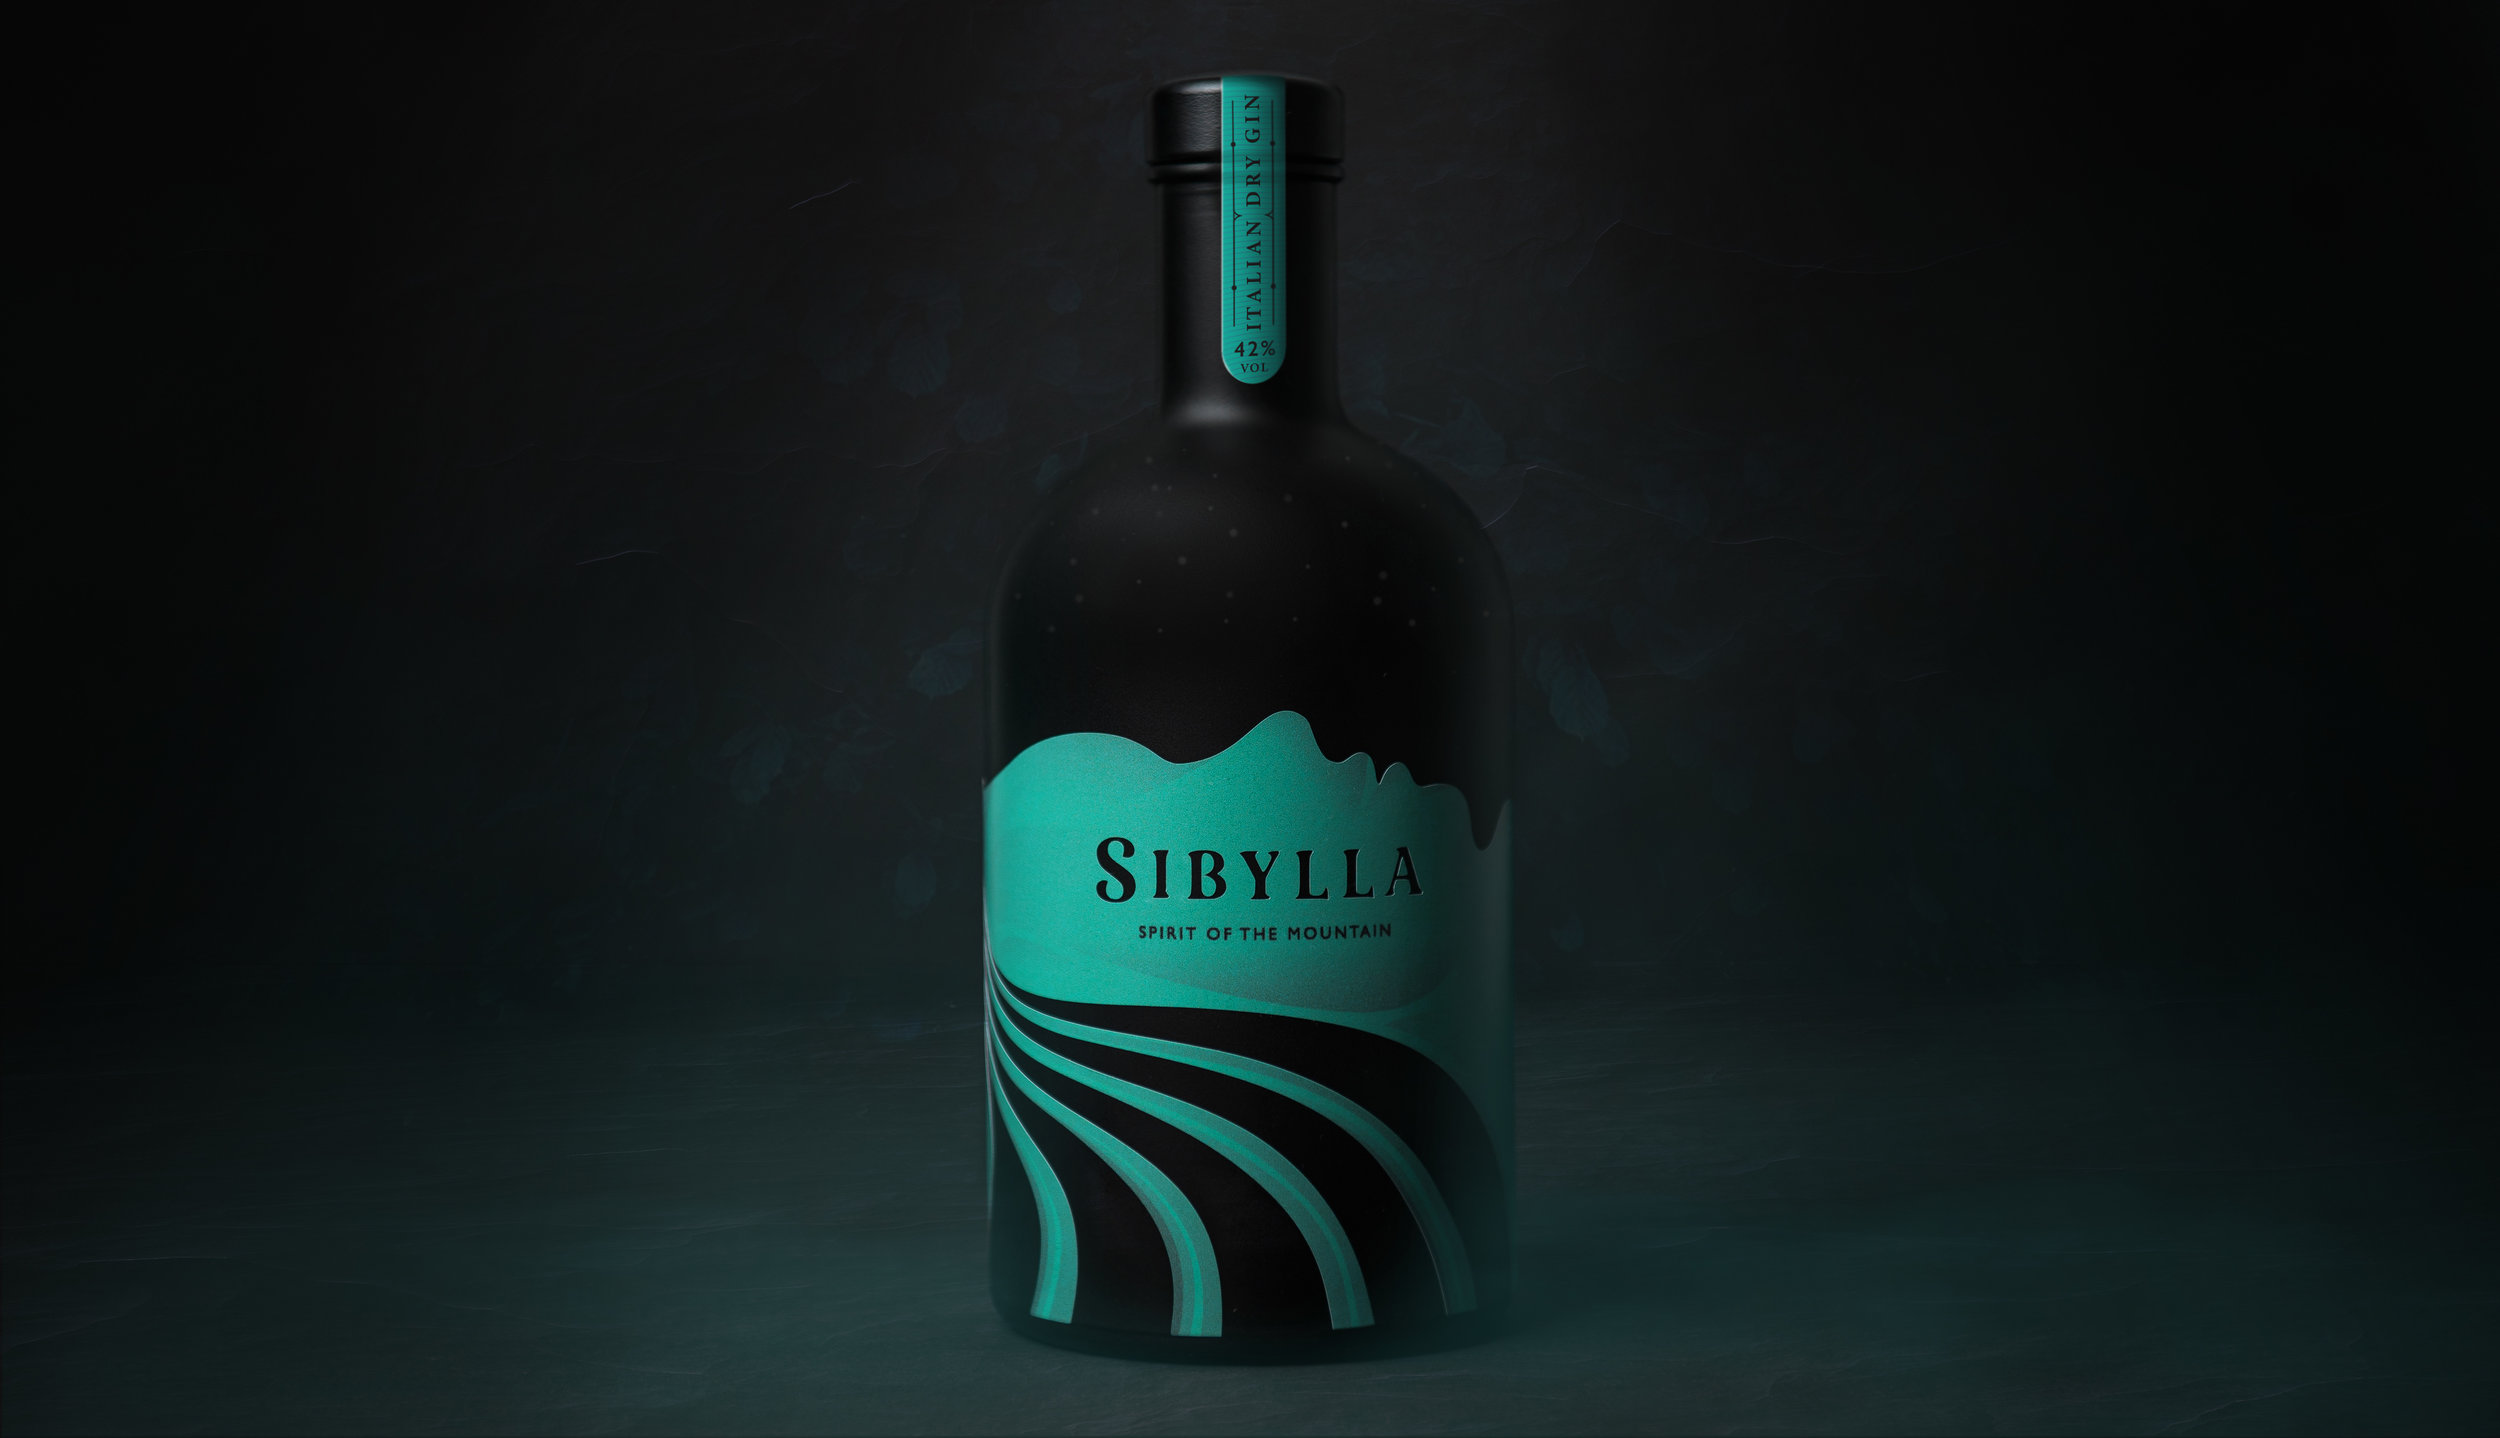 Sibylla, an Italian Dry Gin Inspired by the Local Medieval Legend